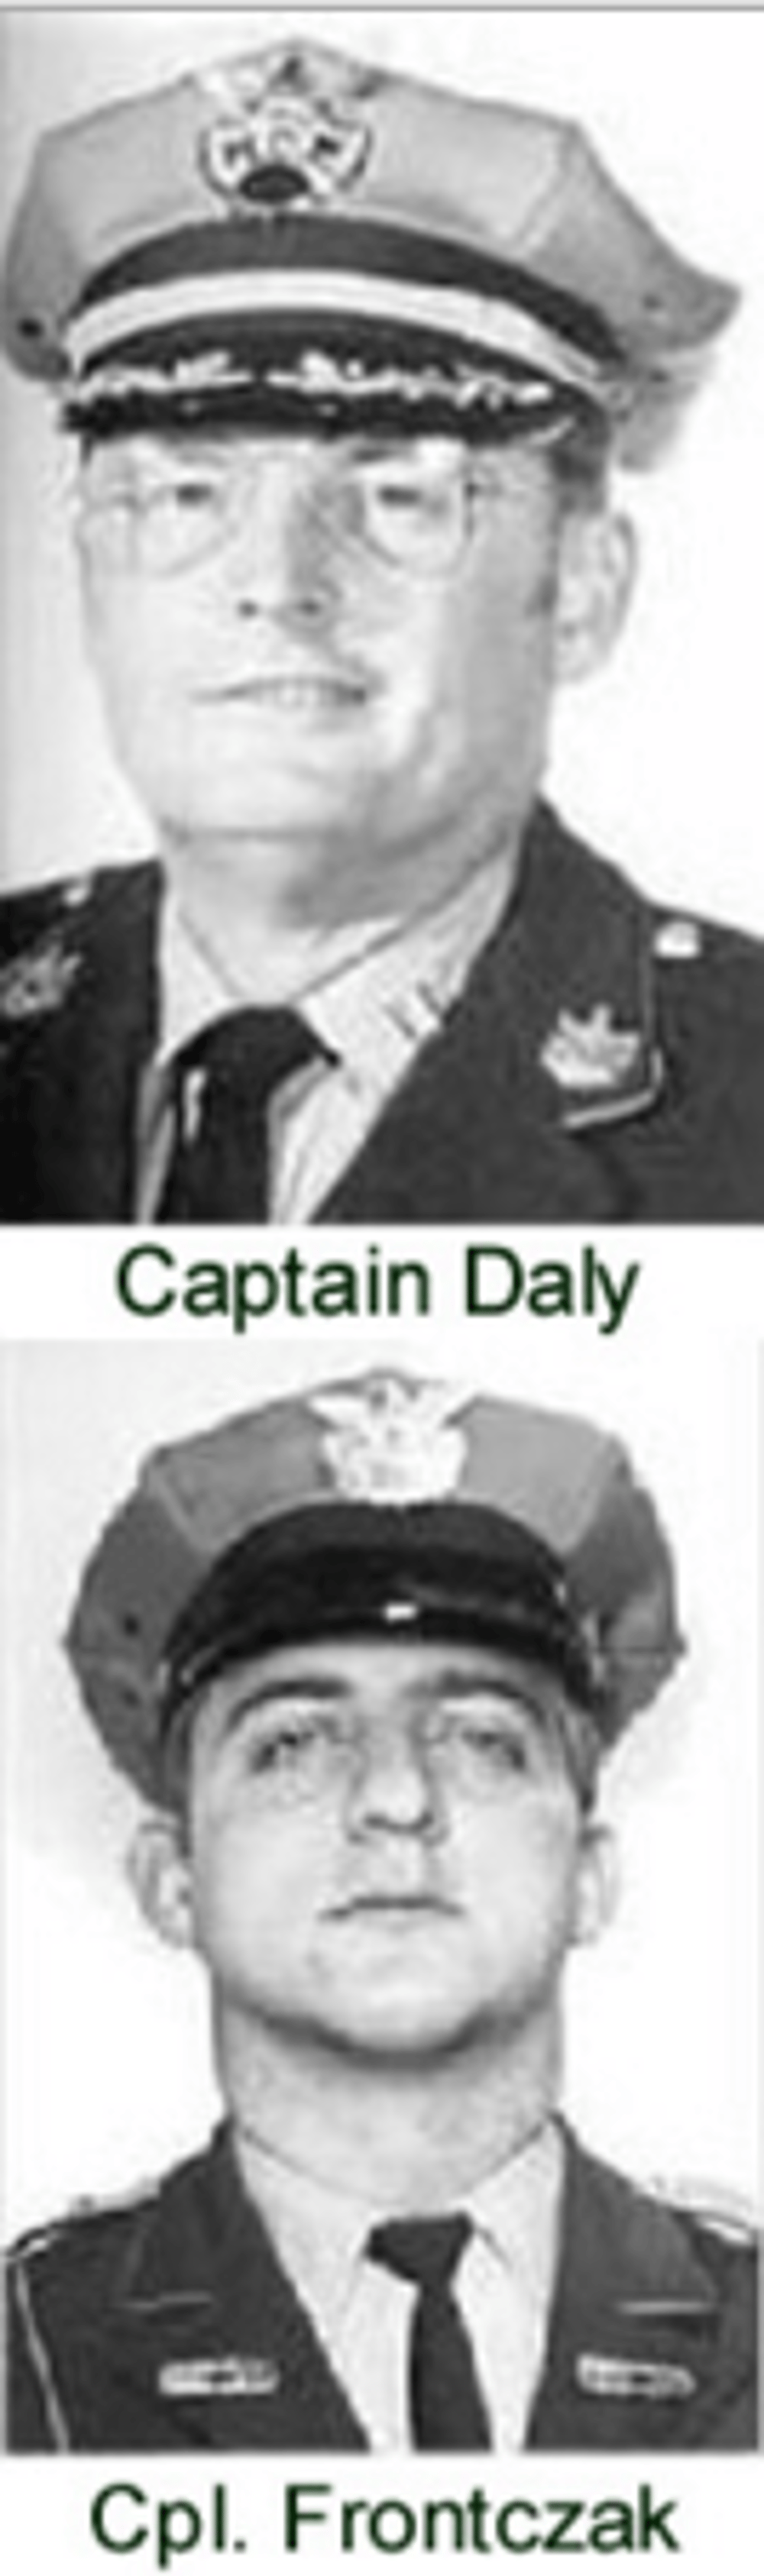 grayscale photo of police officers